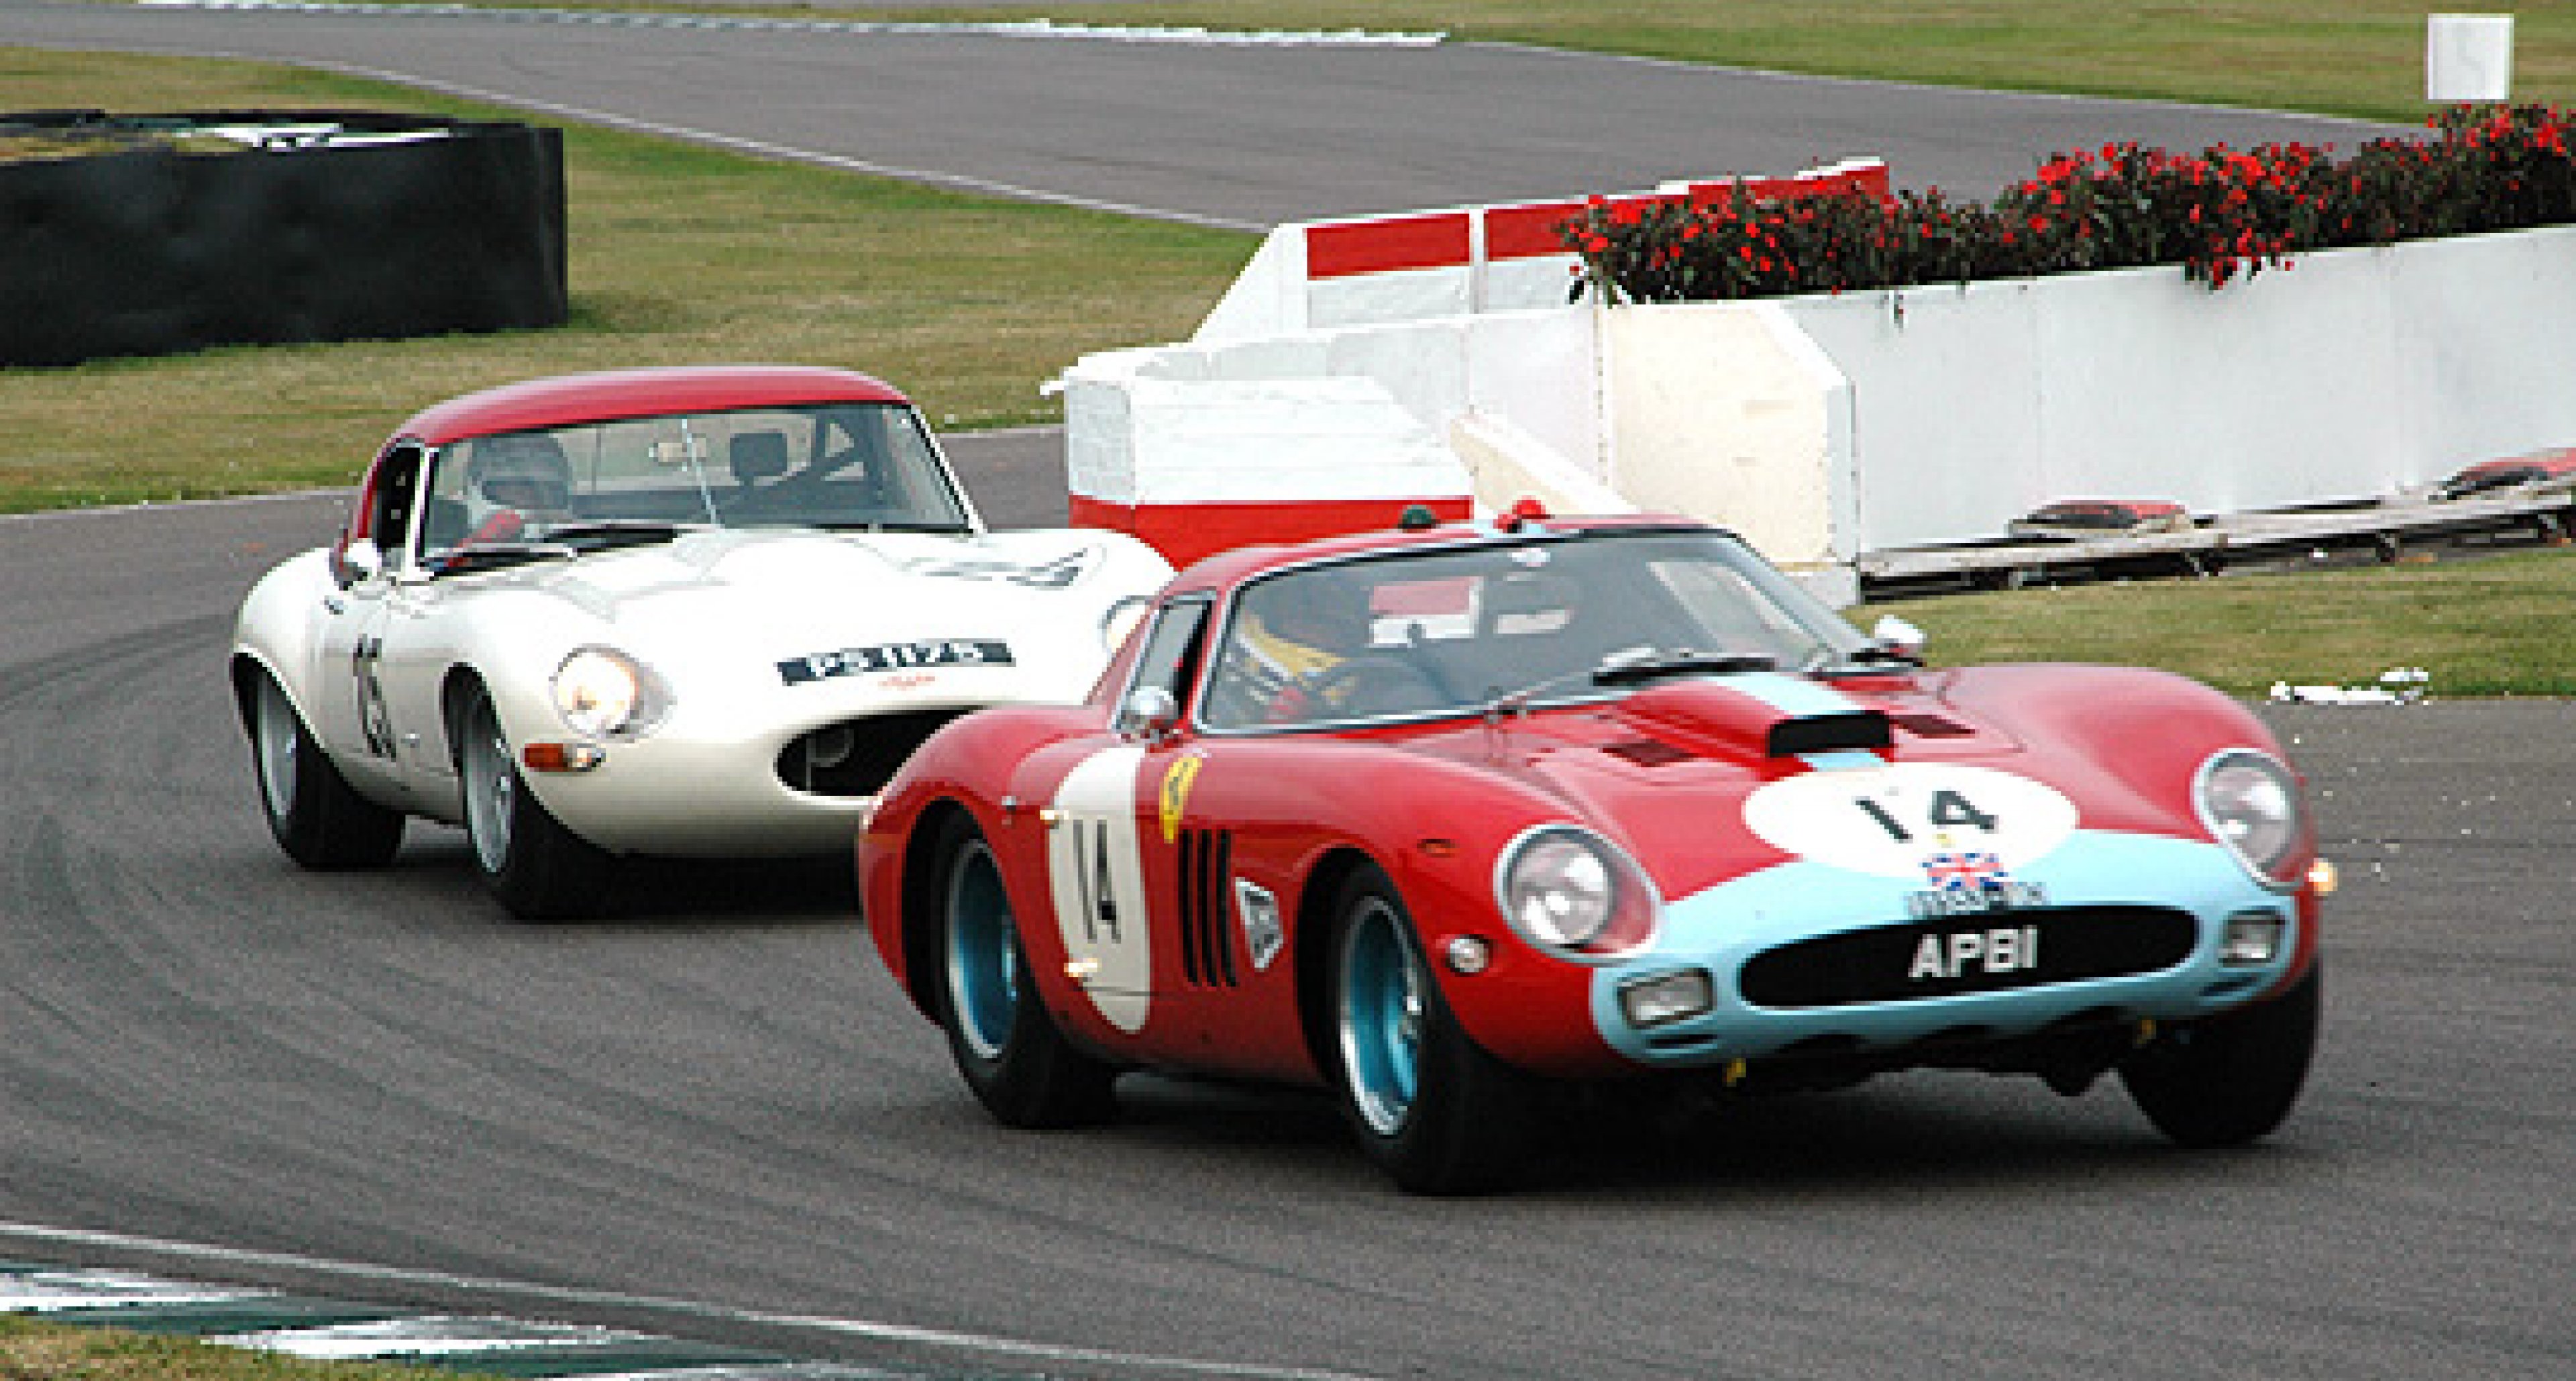 Goodwood 2010: Provisional Dates for Festival and Revival